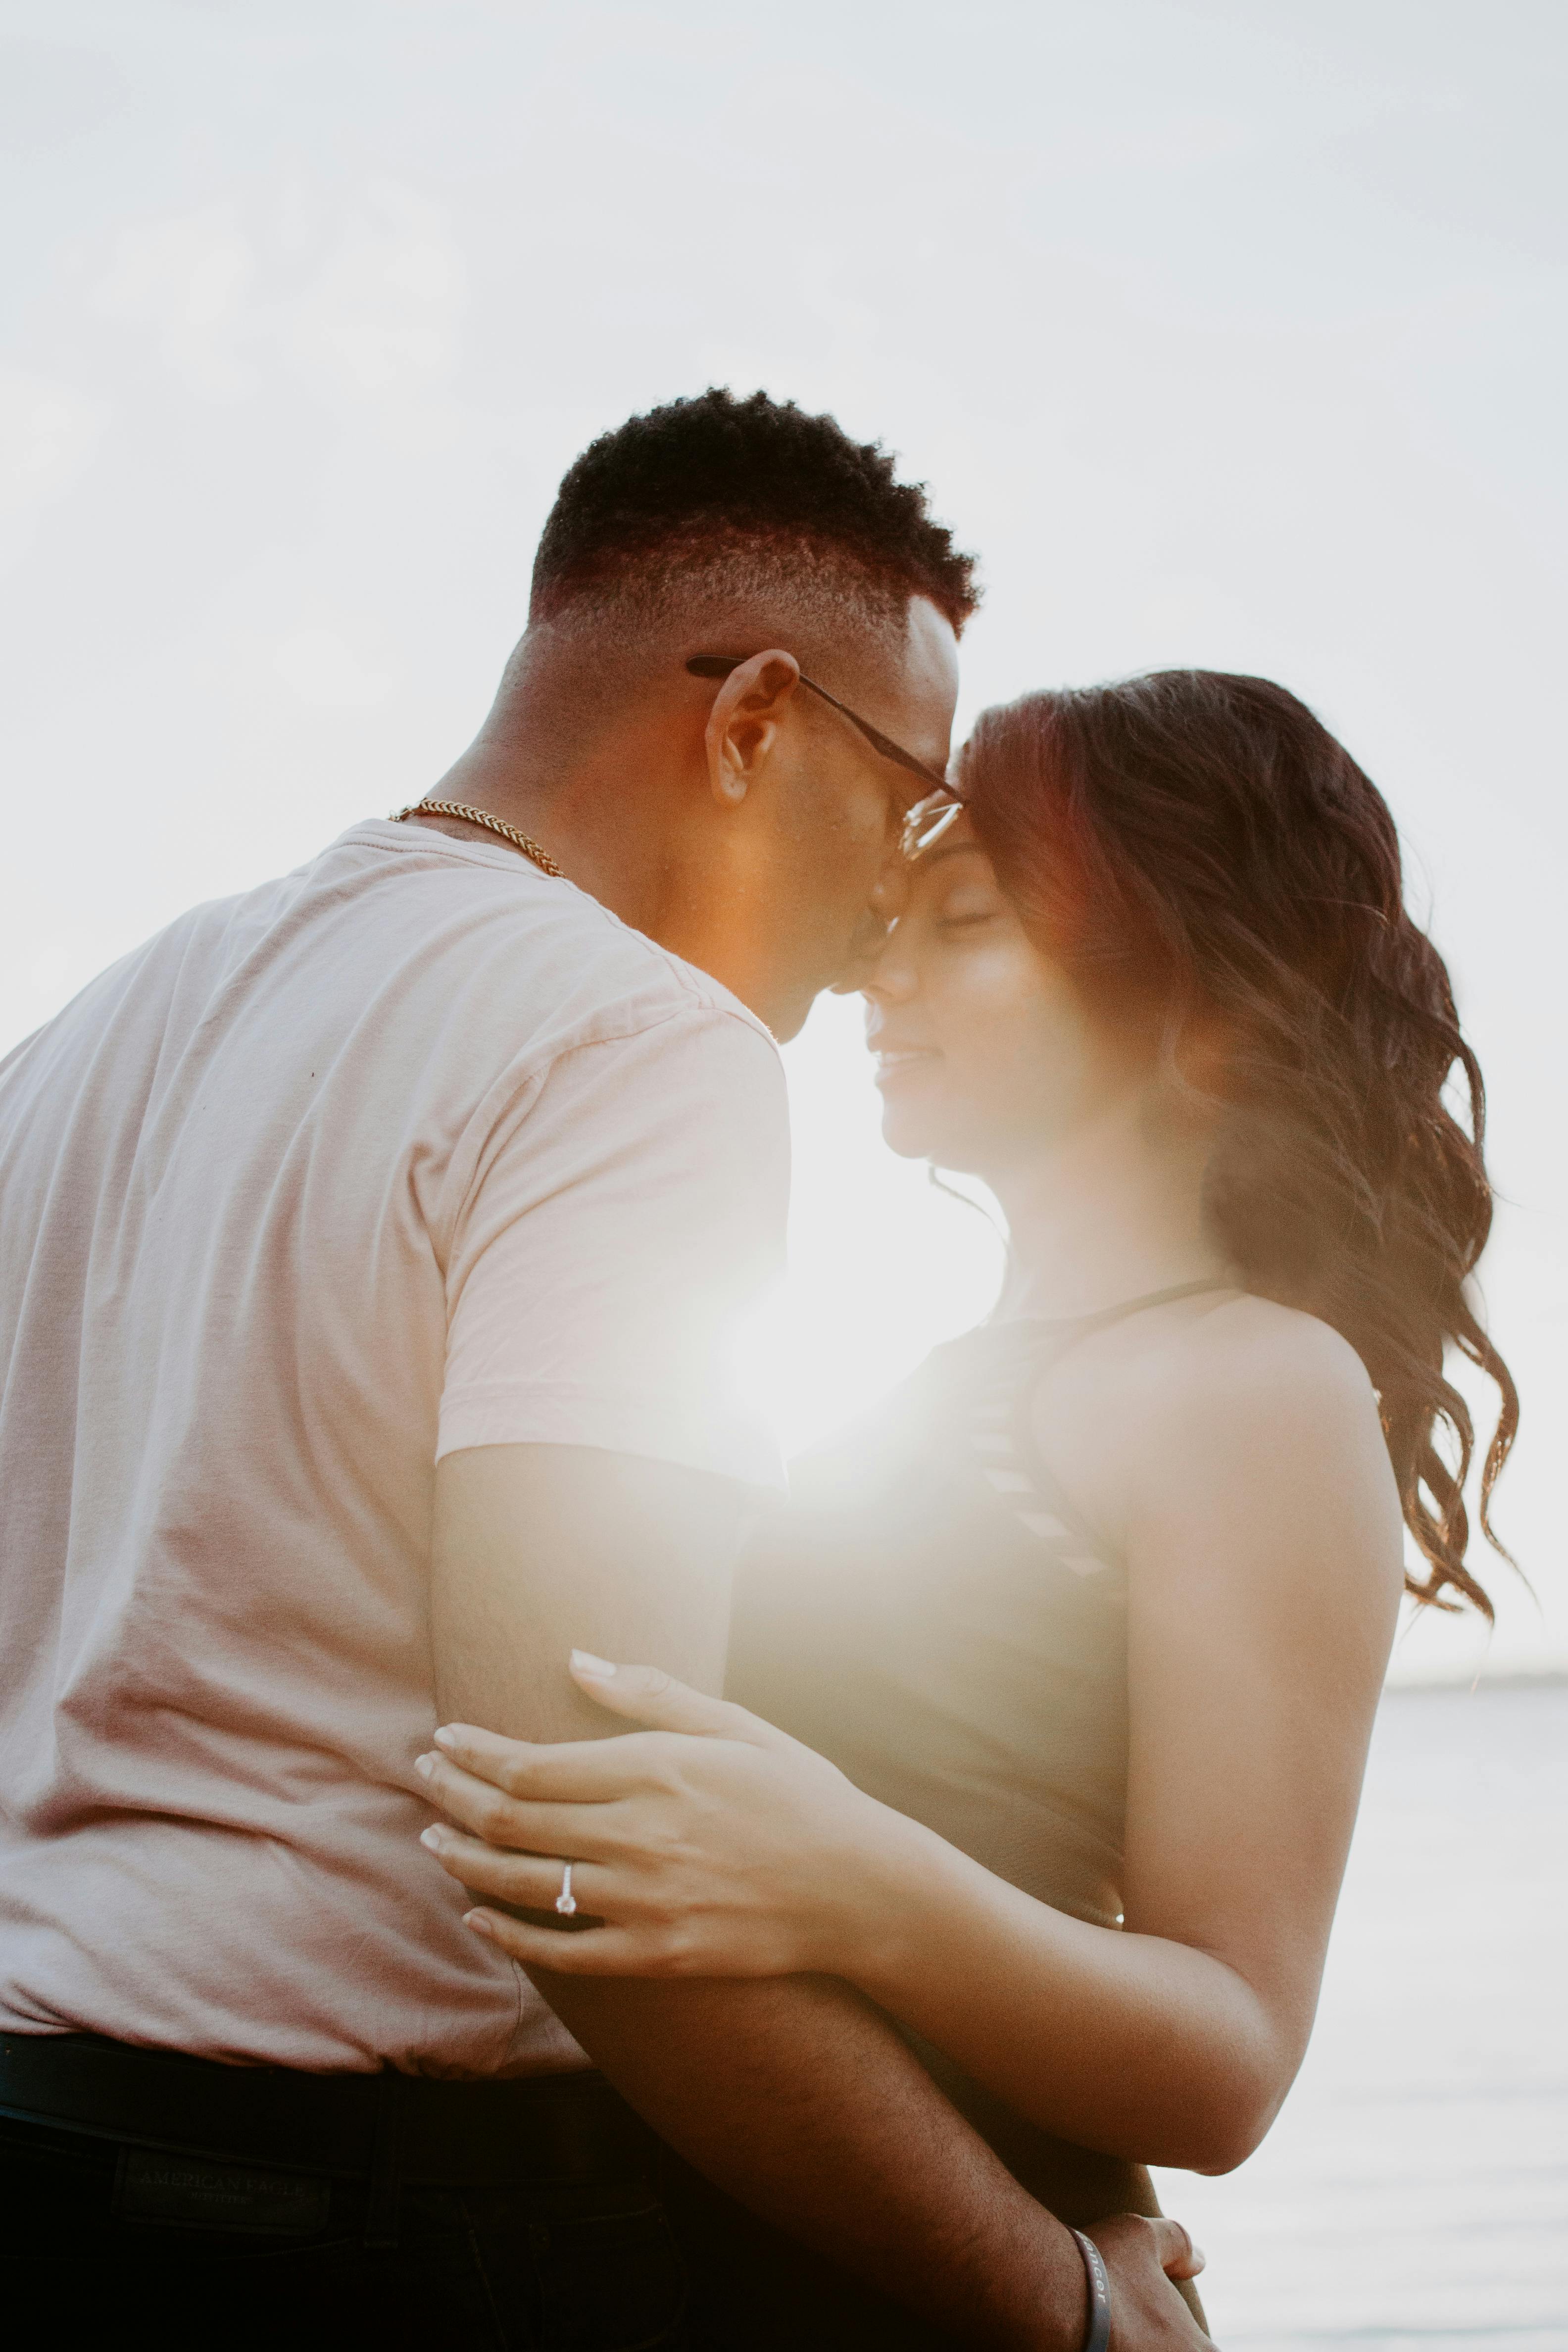 MKEshoots Photography - Let's admit this- is there anything more romantic  and enchanting than kissing on forehead? The forehead kiss pose is  definitely ethereally beautiful in the engagement & wedding photo album.